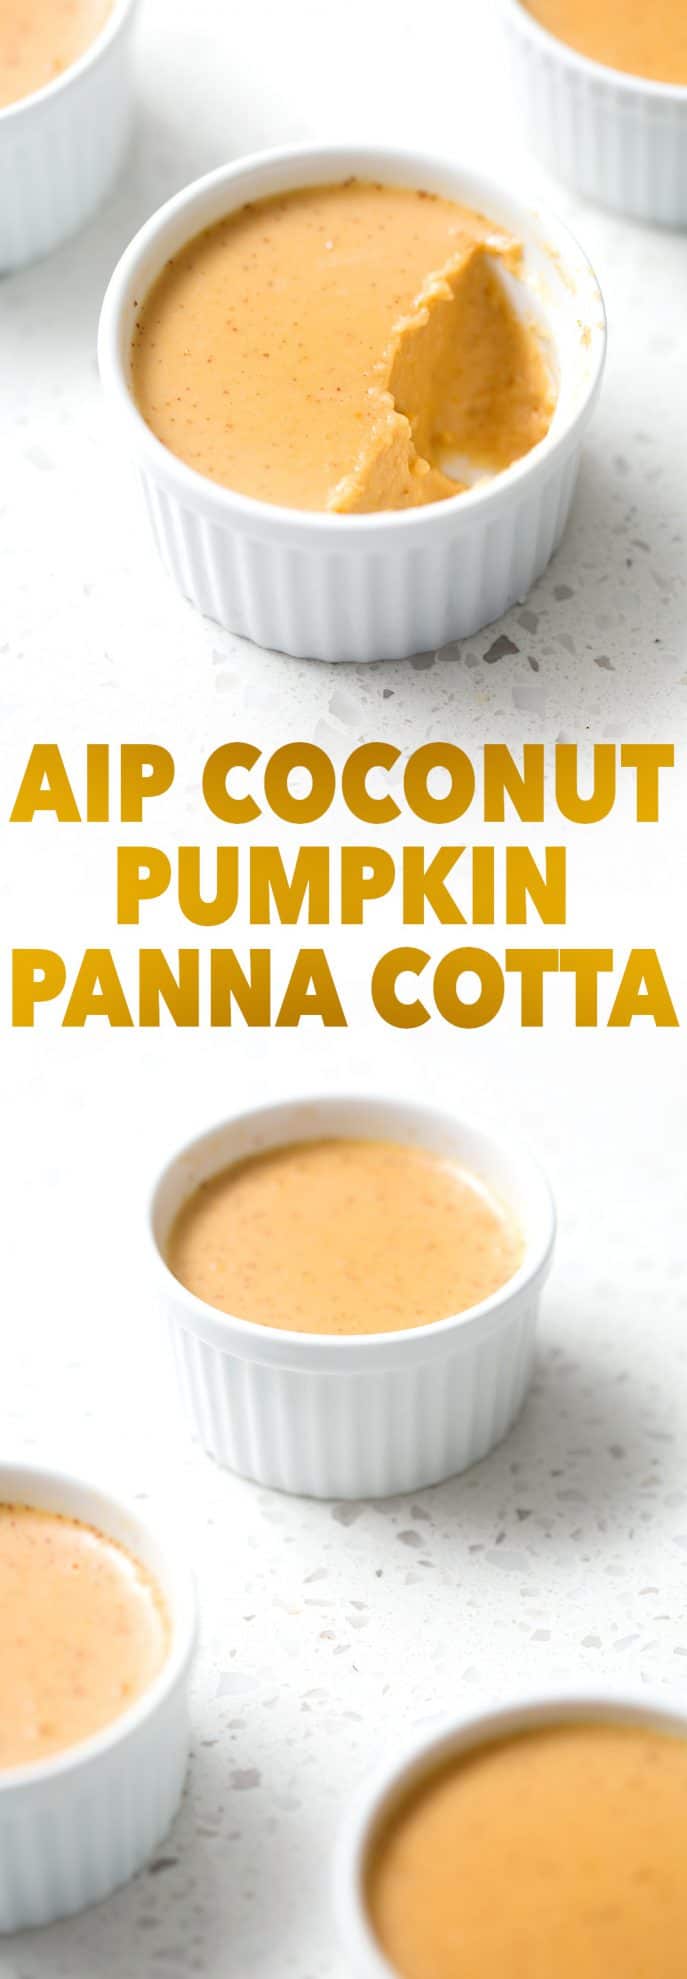 Here’s an AIP (which means dairy, soy, nut and refined sugar free) coconut based dessert that is the new wintertime favorite. Perfect for your healthy holidays! This recipe is allergy friendly (gluten, dairy, shellfish, nut, egg, and soy free) and suits the autoimmune protocol (AIP) and paleo diets.